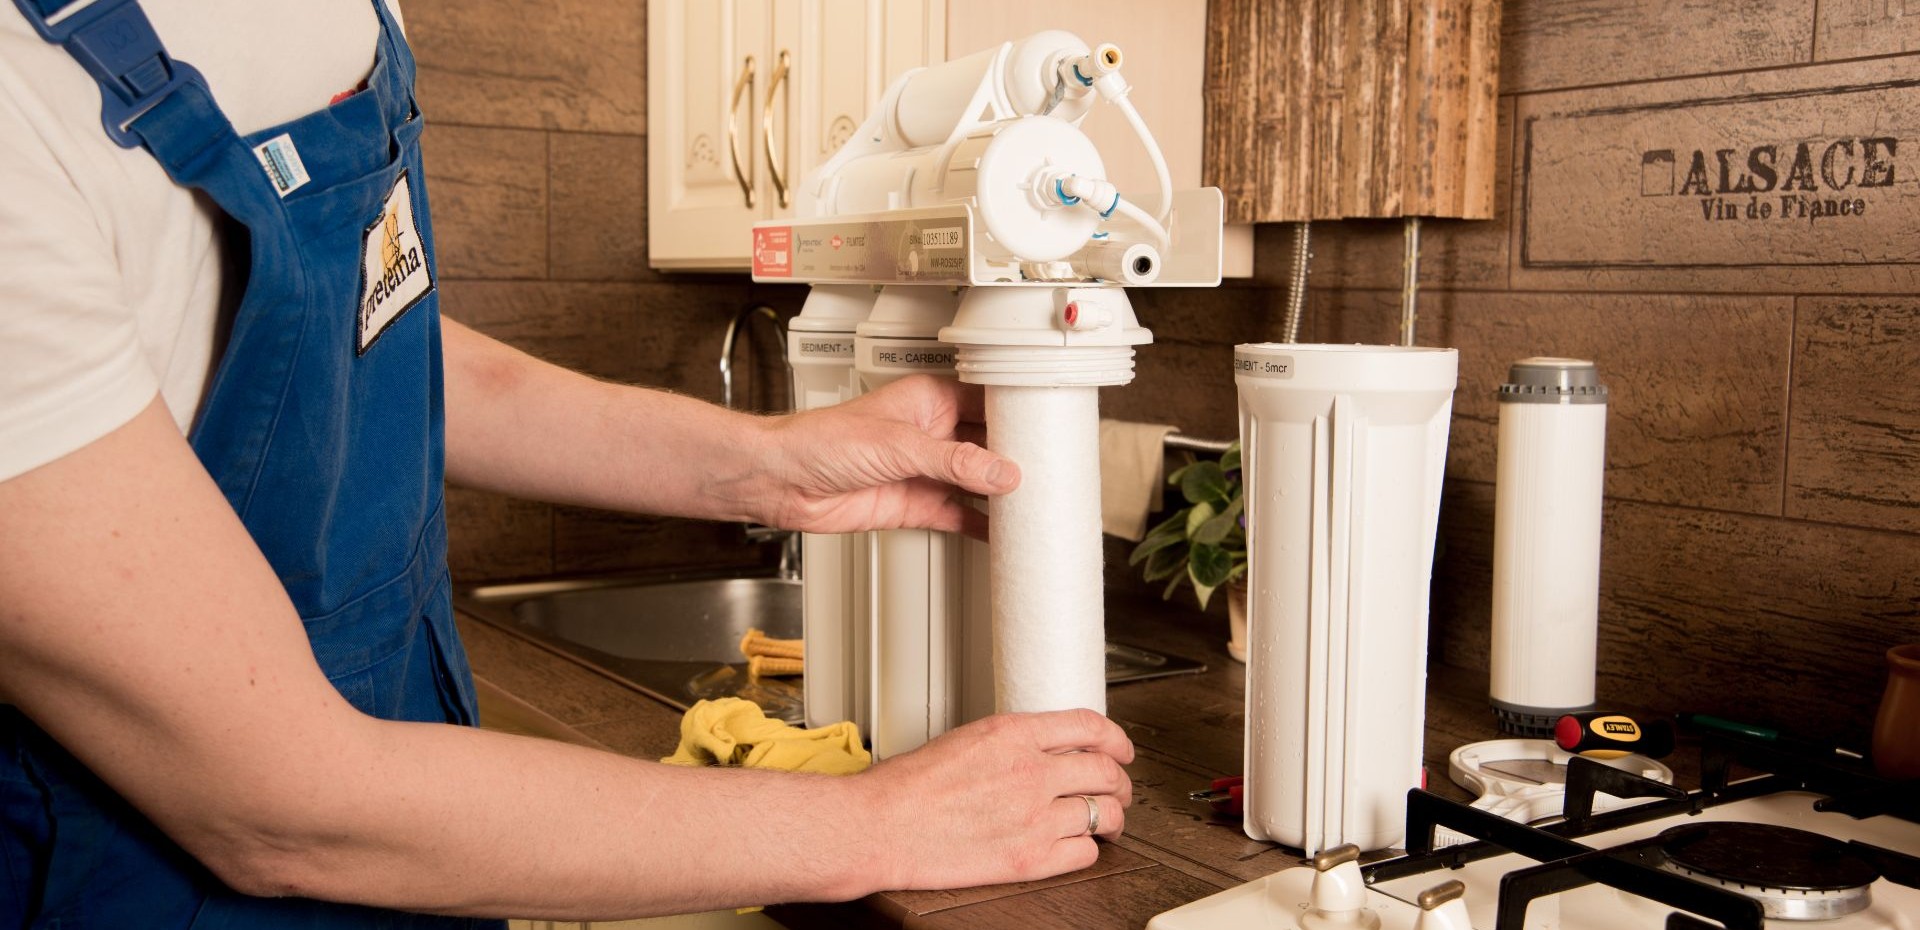 How often do we need to renew the water filter? 